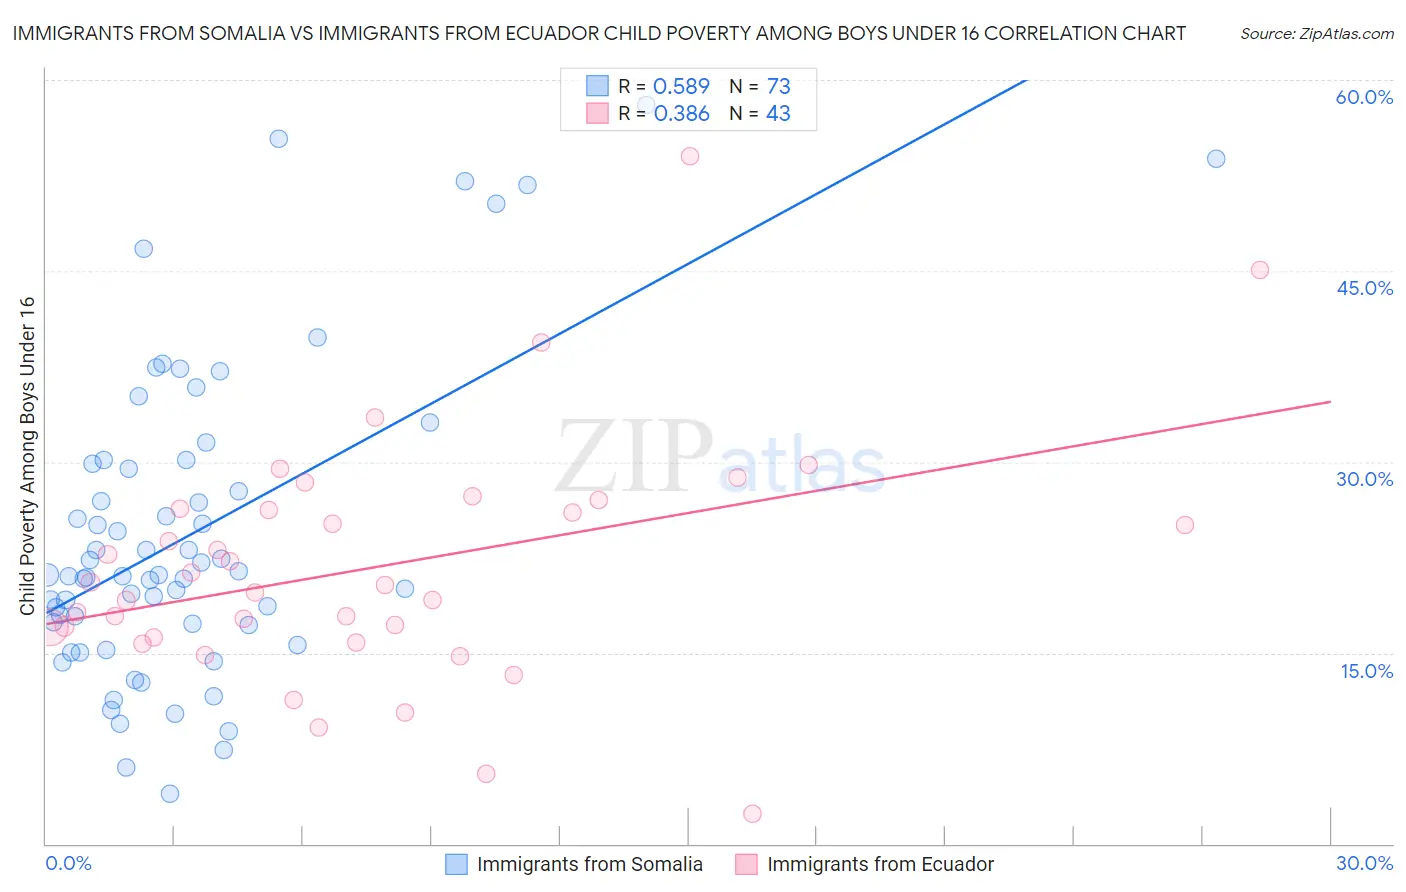 Immigrants from Somalia vs Immigrants from Ecuador Child Poverty Among Boys Under 16